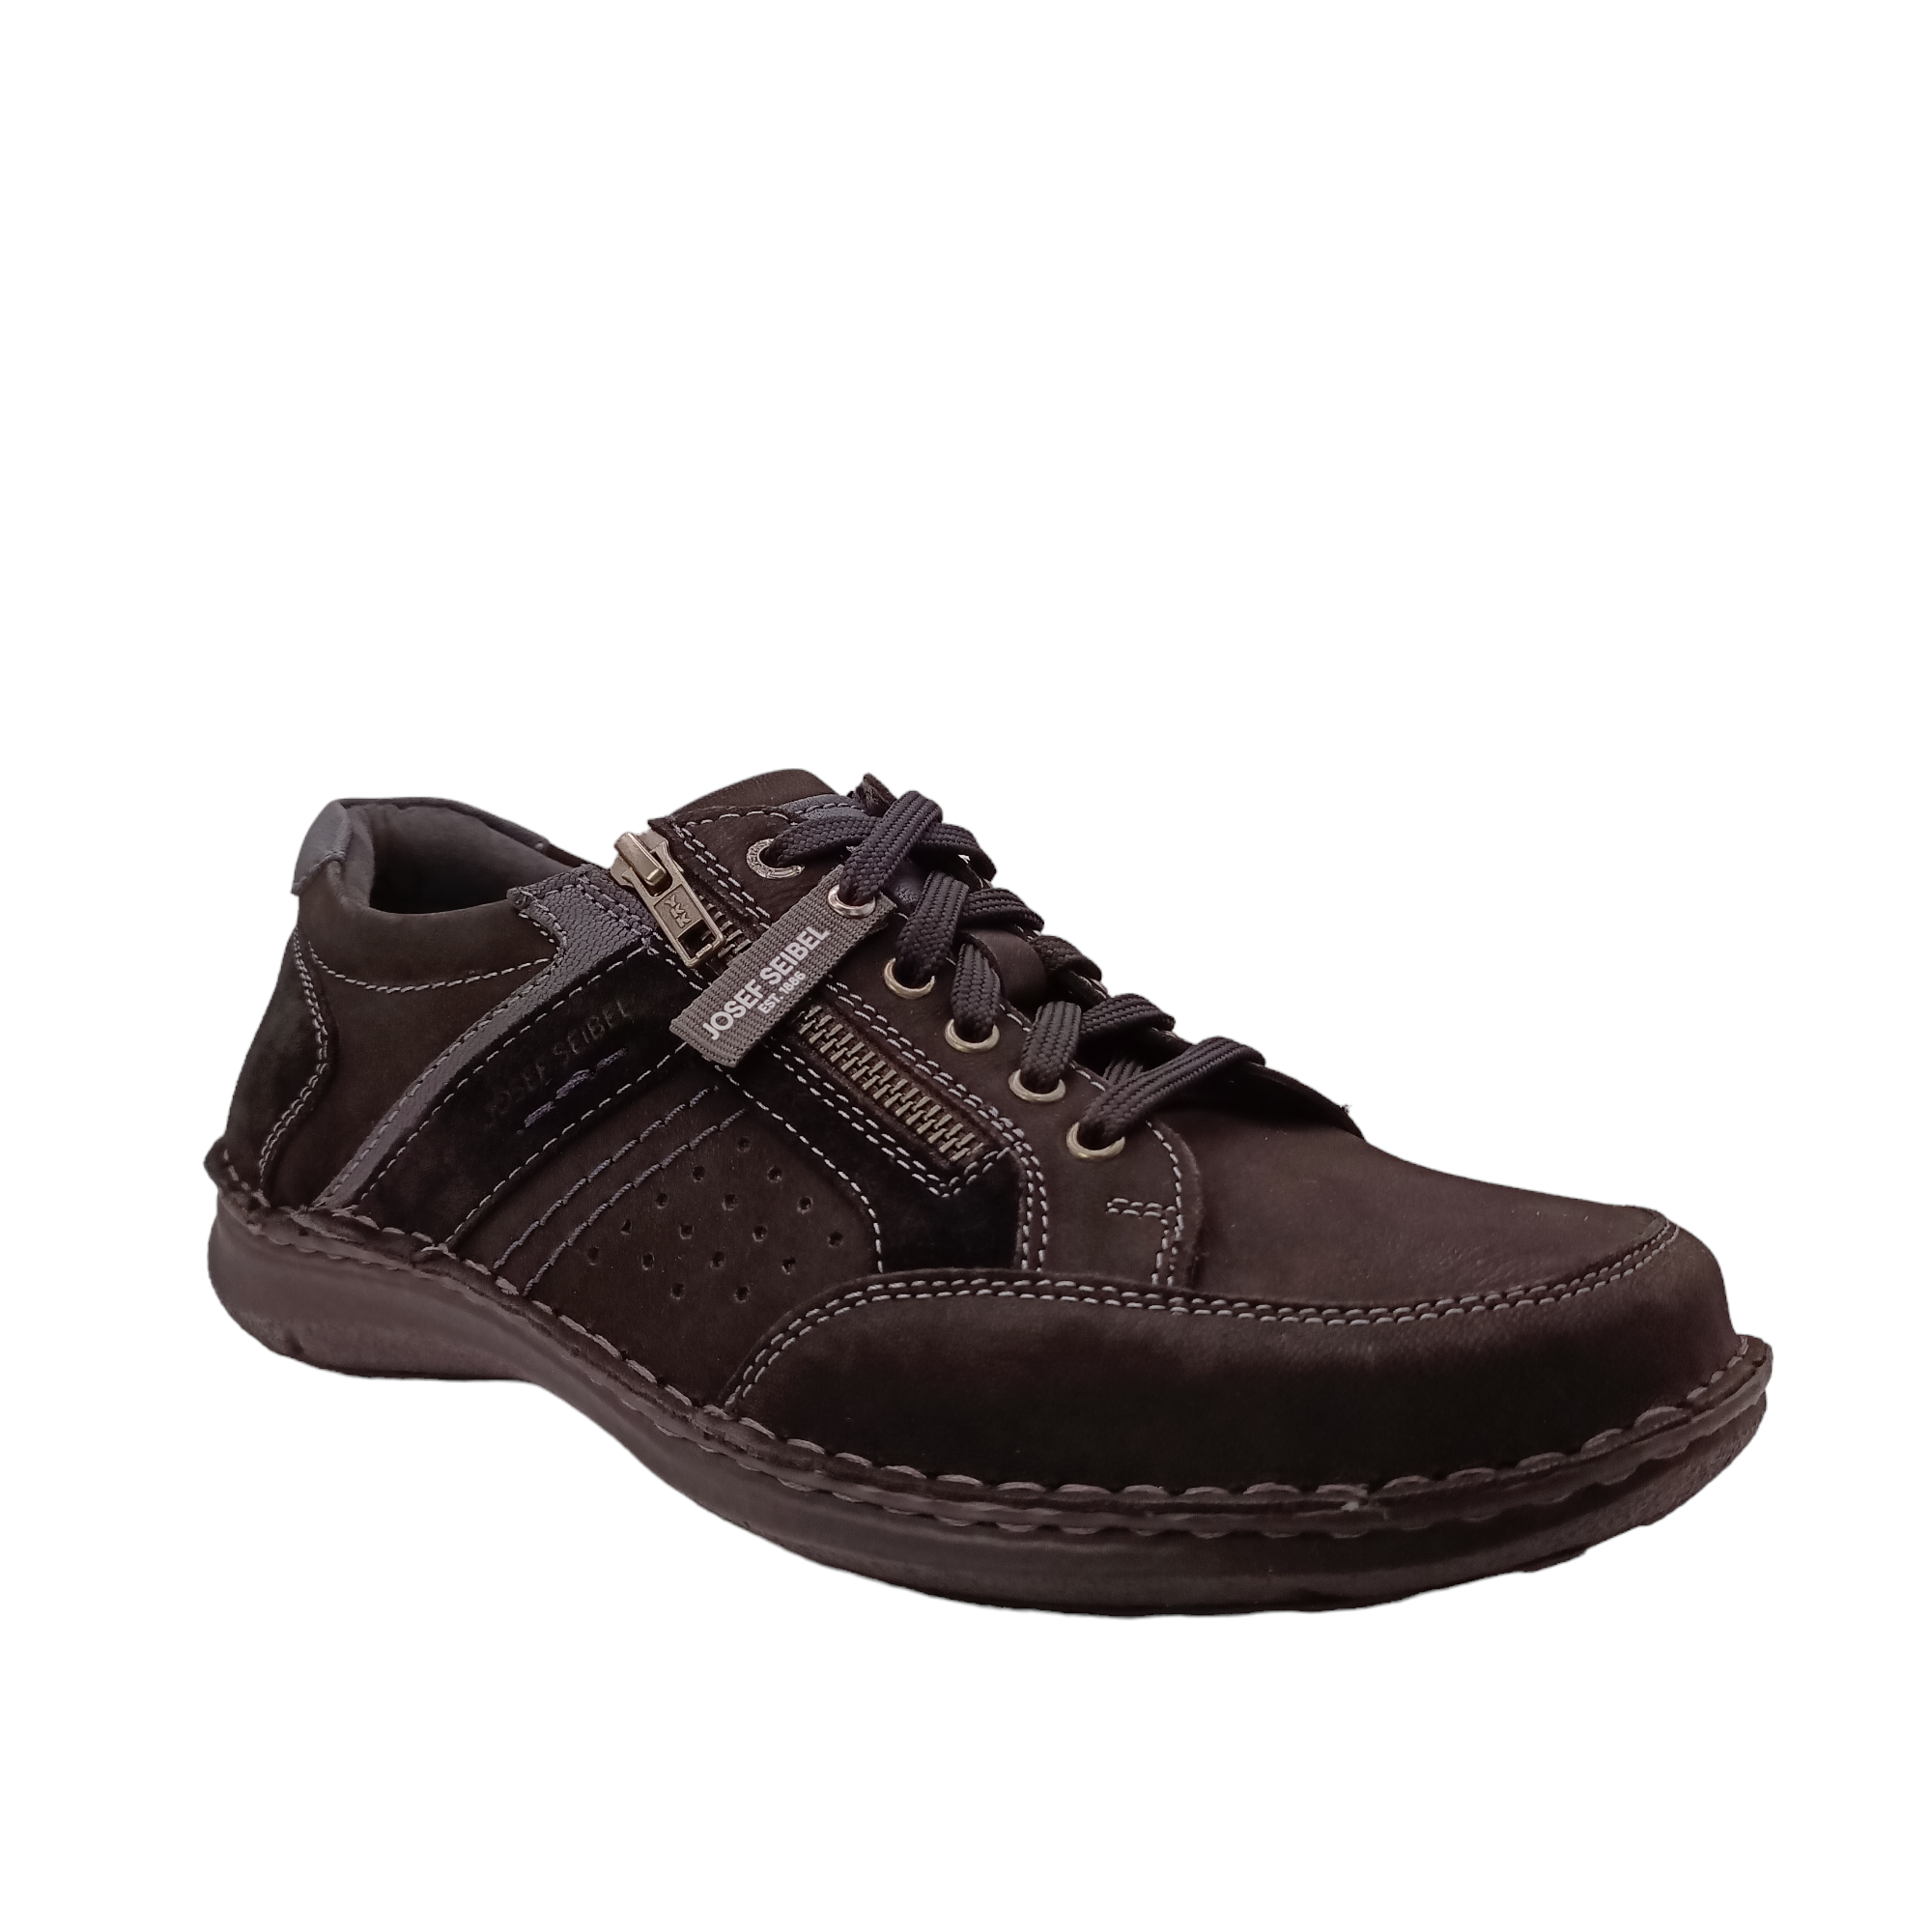 Shop Anvers 87 Josef Seibel - with shoe&me - from Josef Seibel - Shoes - Mens, Shoe, Winter - [collection]